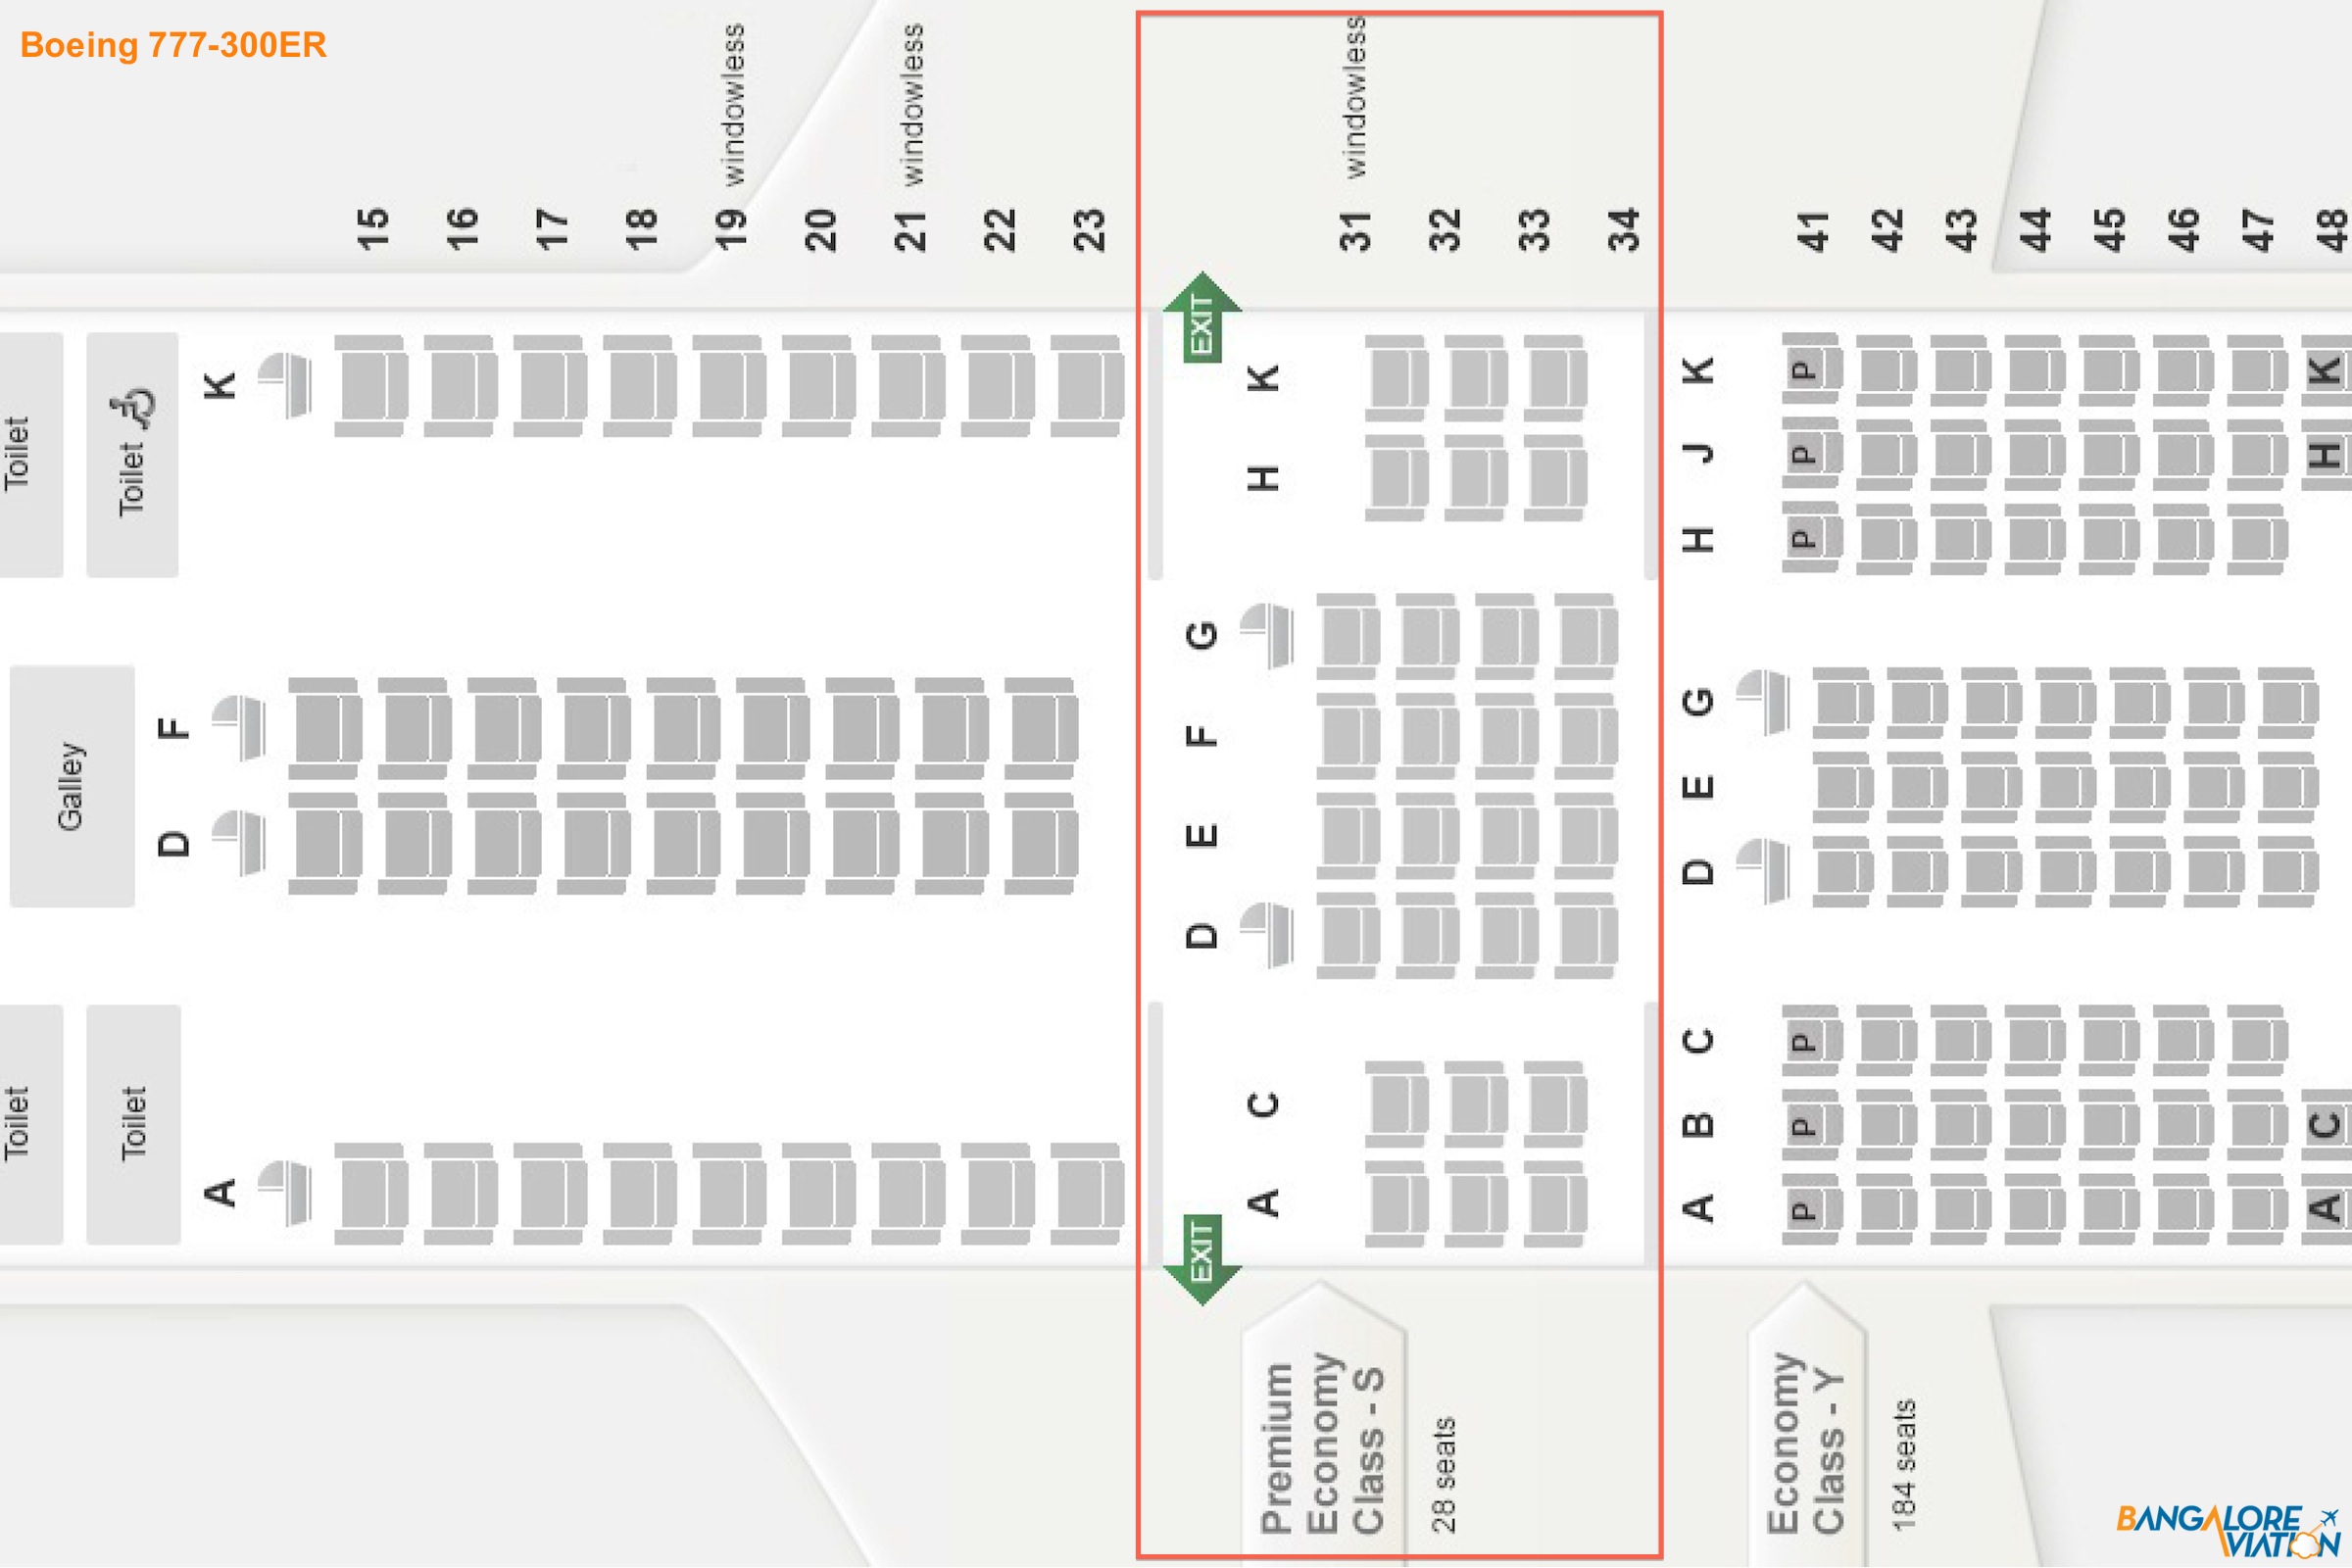 Airbus a380 800 seating chart